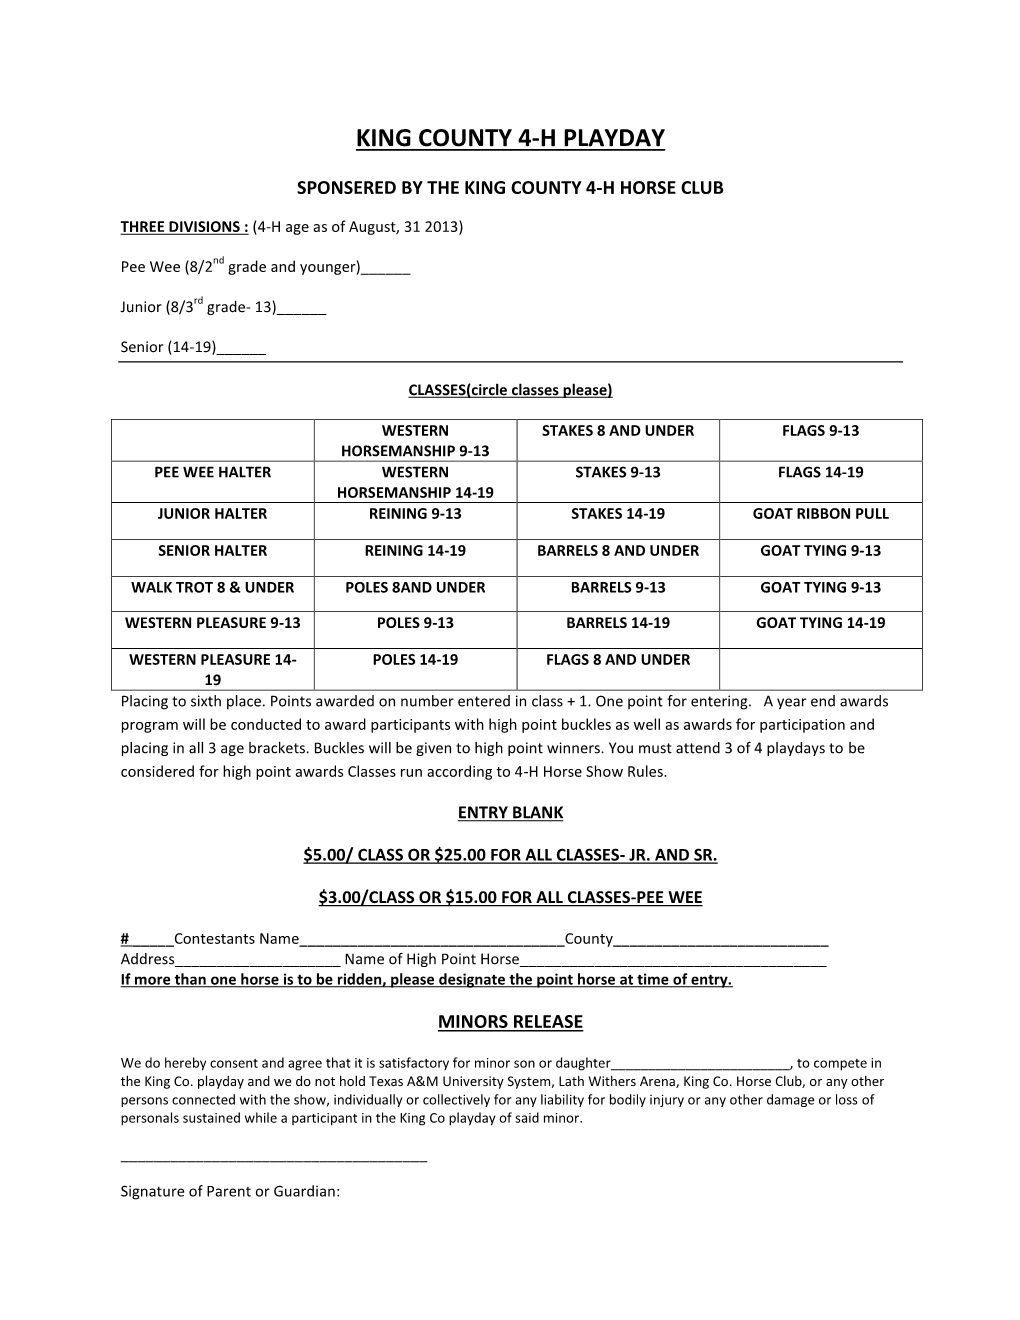 King County Horse Playday Entry Sheet